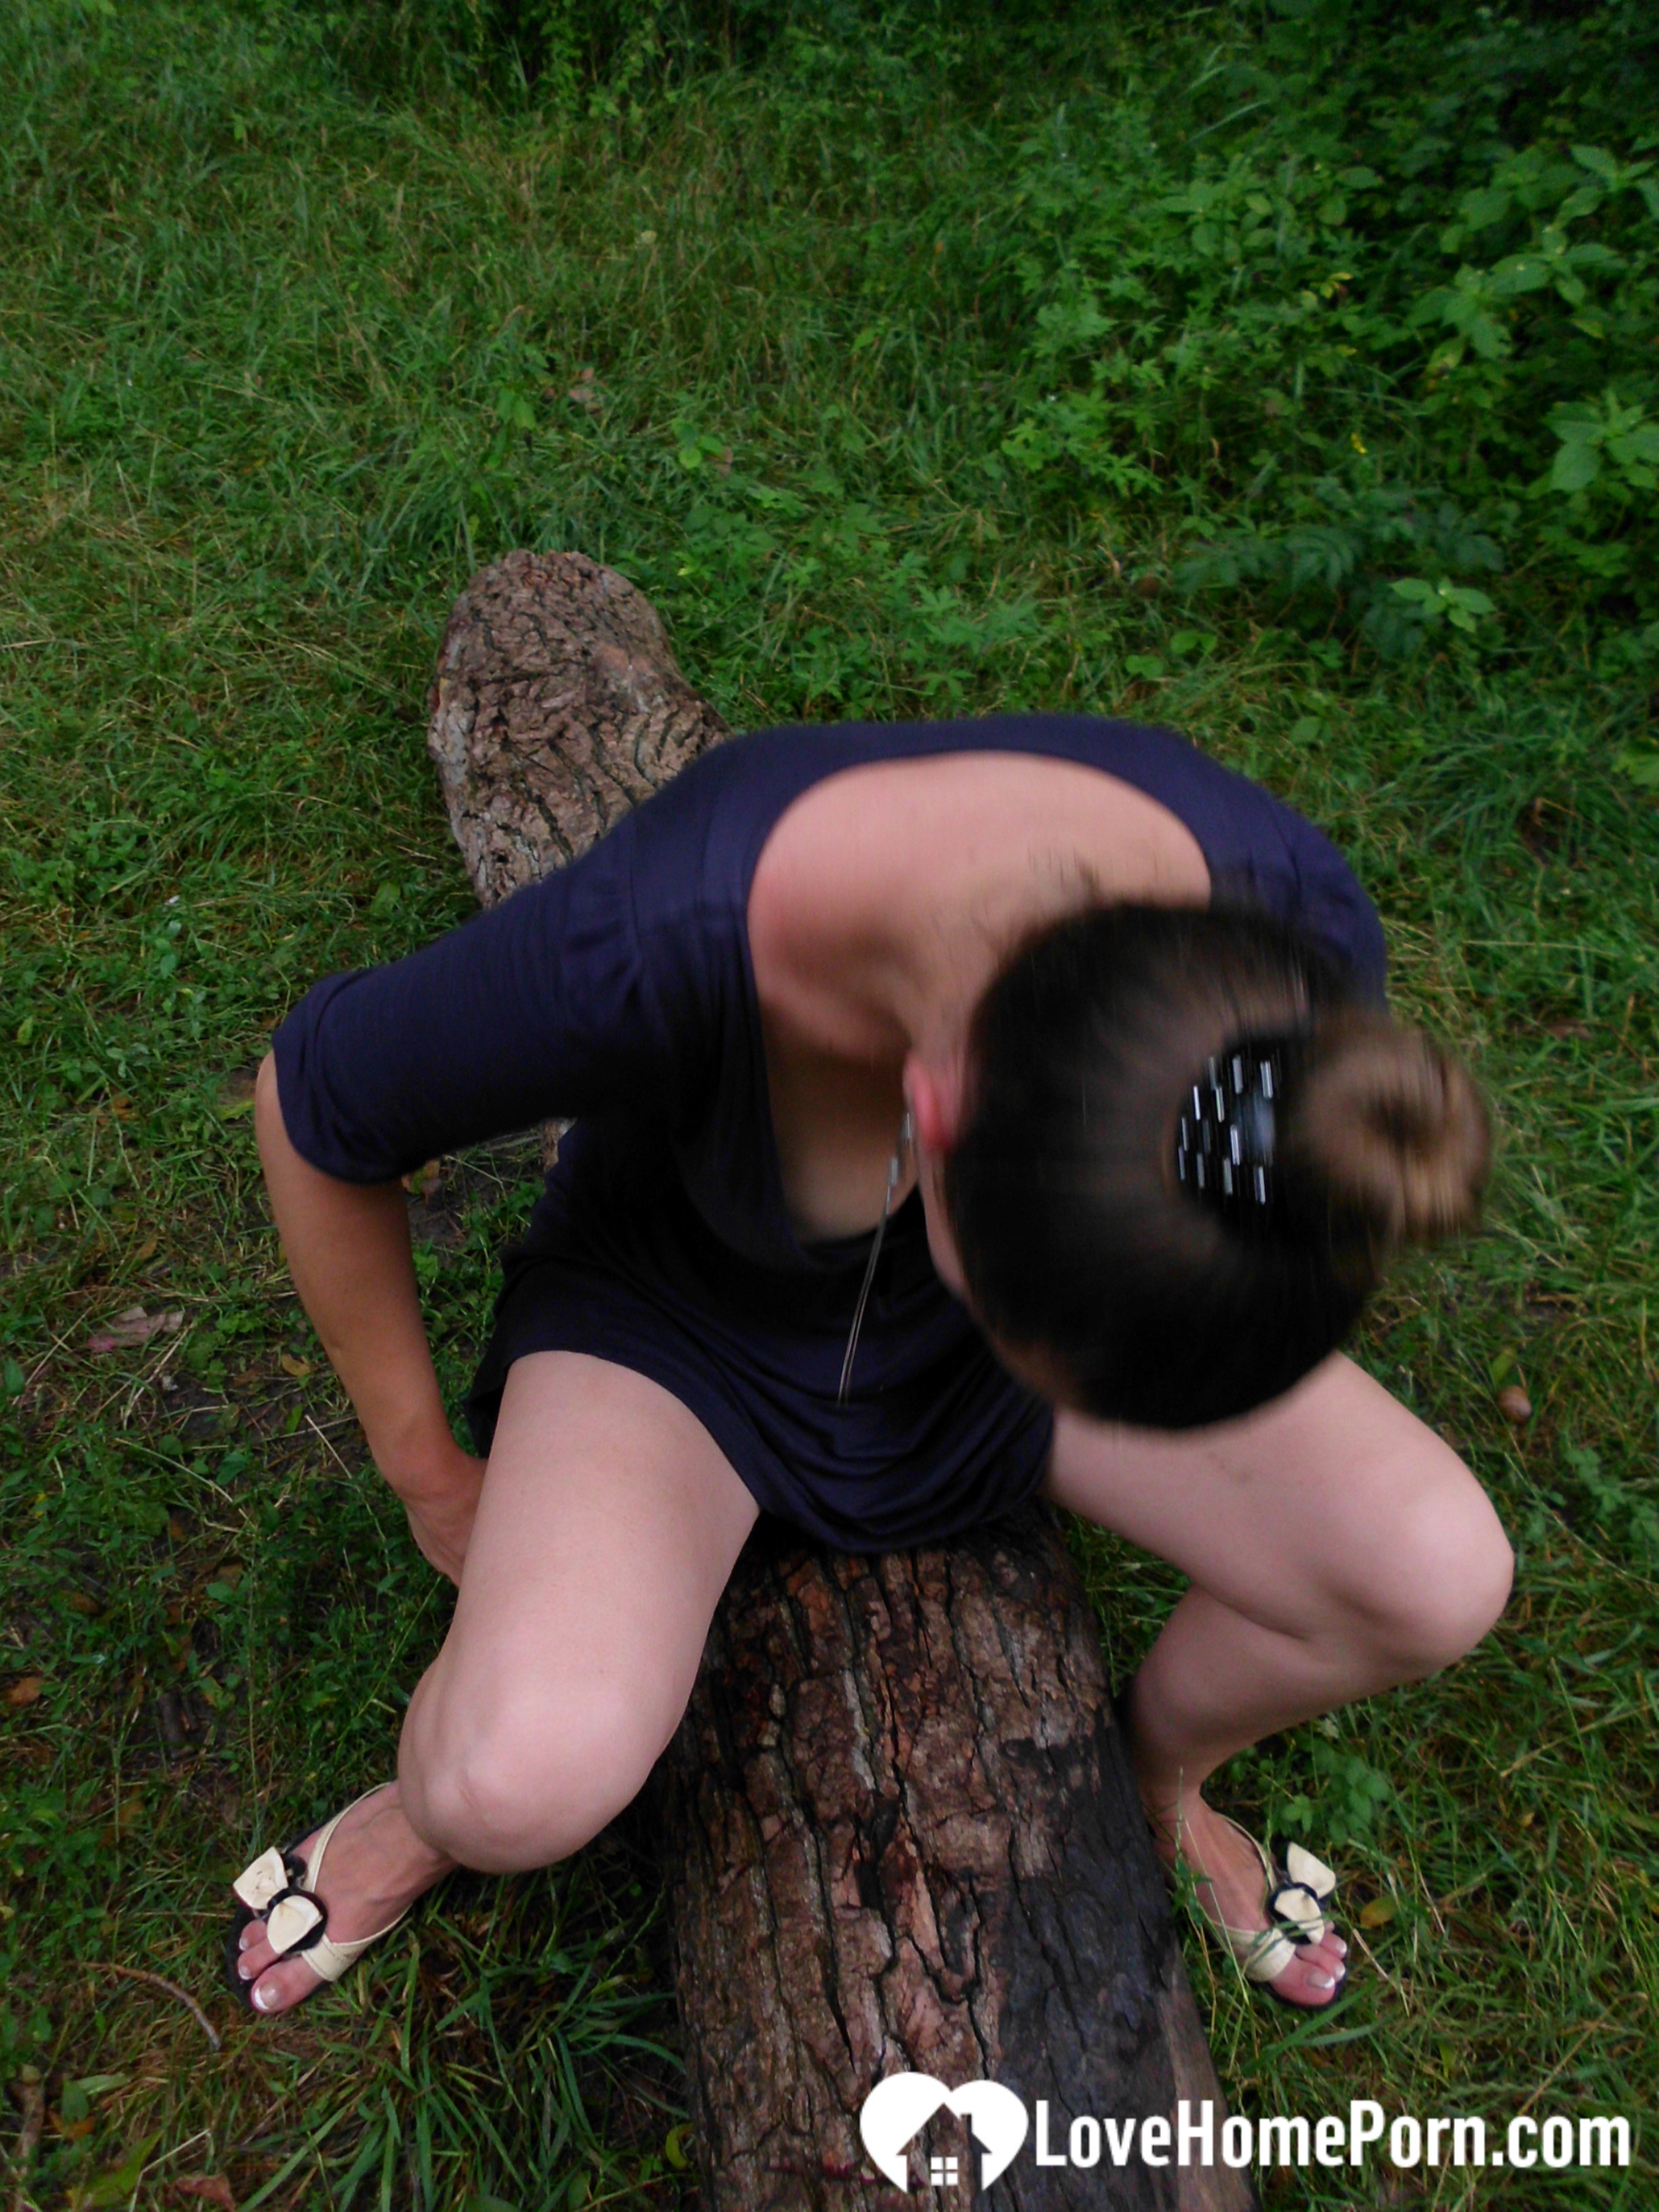 Girlfriend outdoors decides to pleasure herself passionately